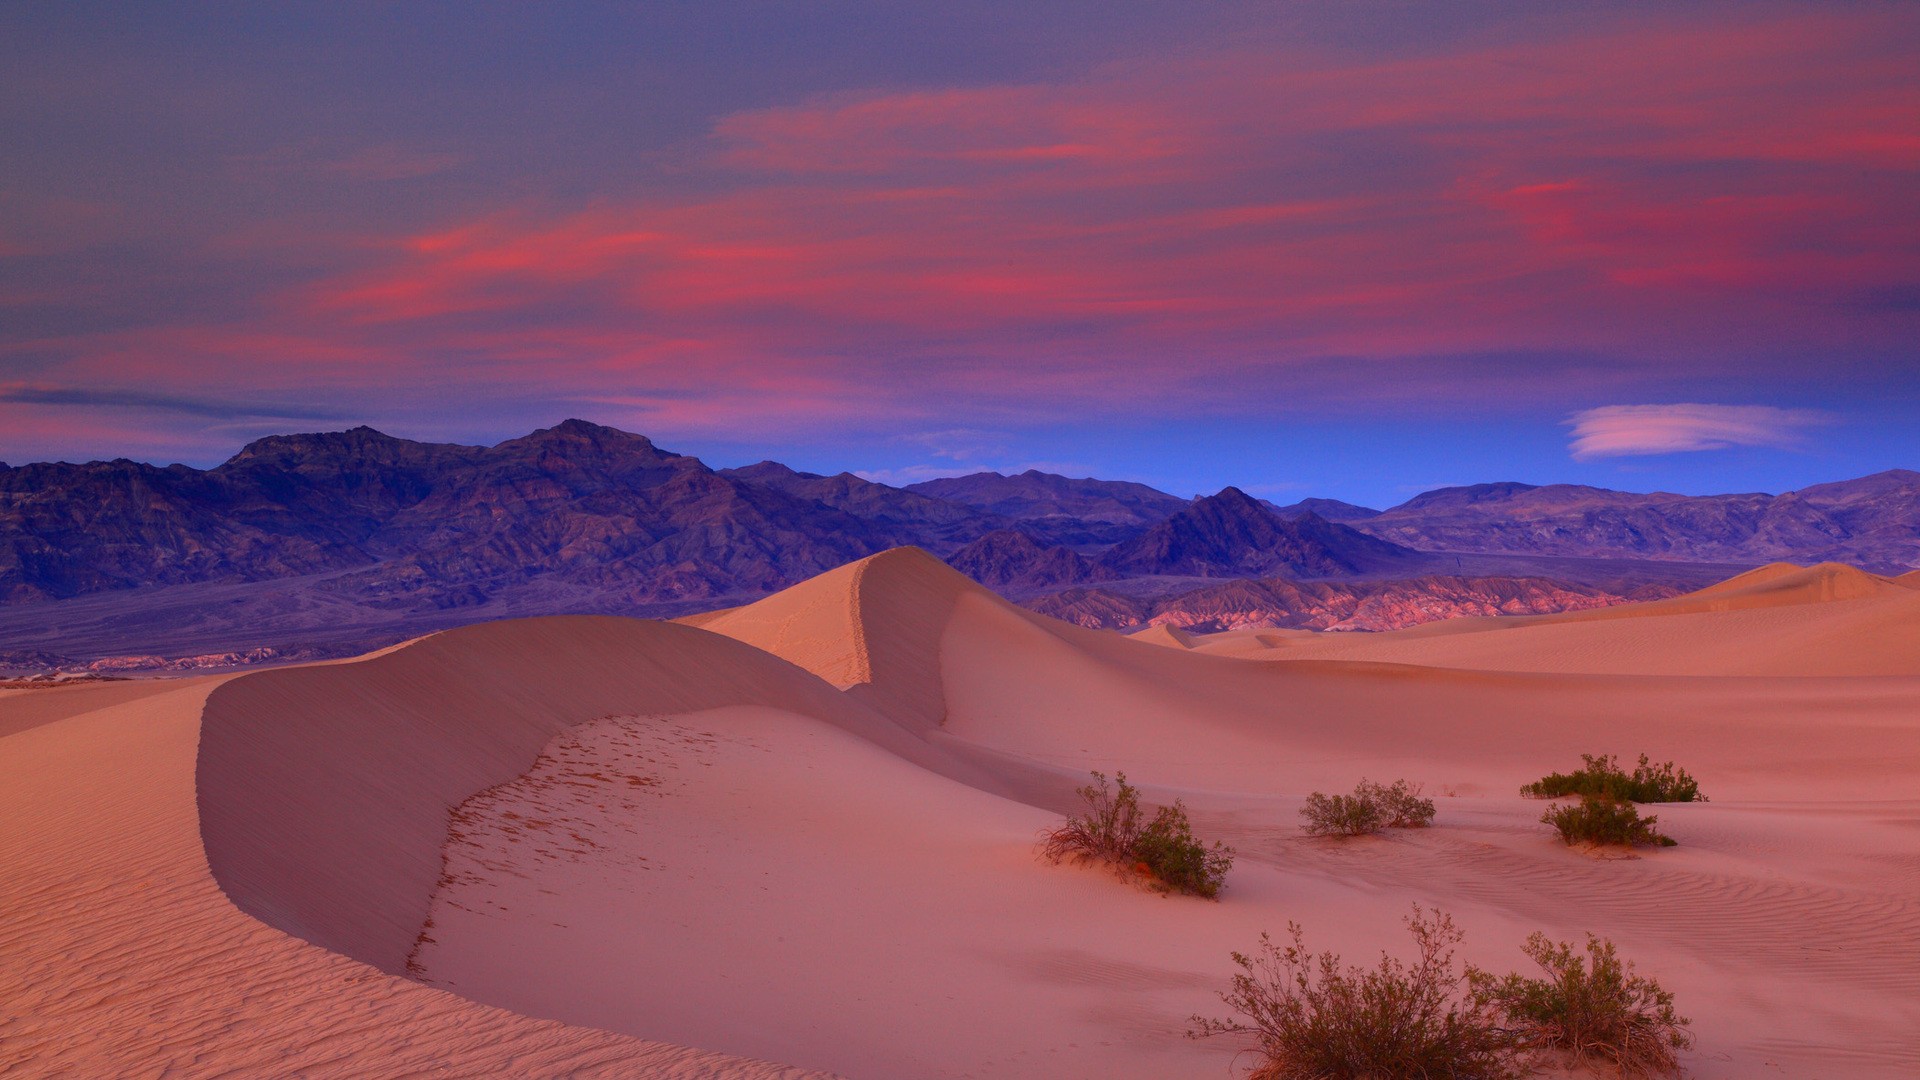 Desert pink wallpapers and images   wallpapers pictures photos